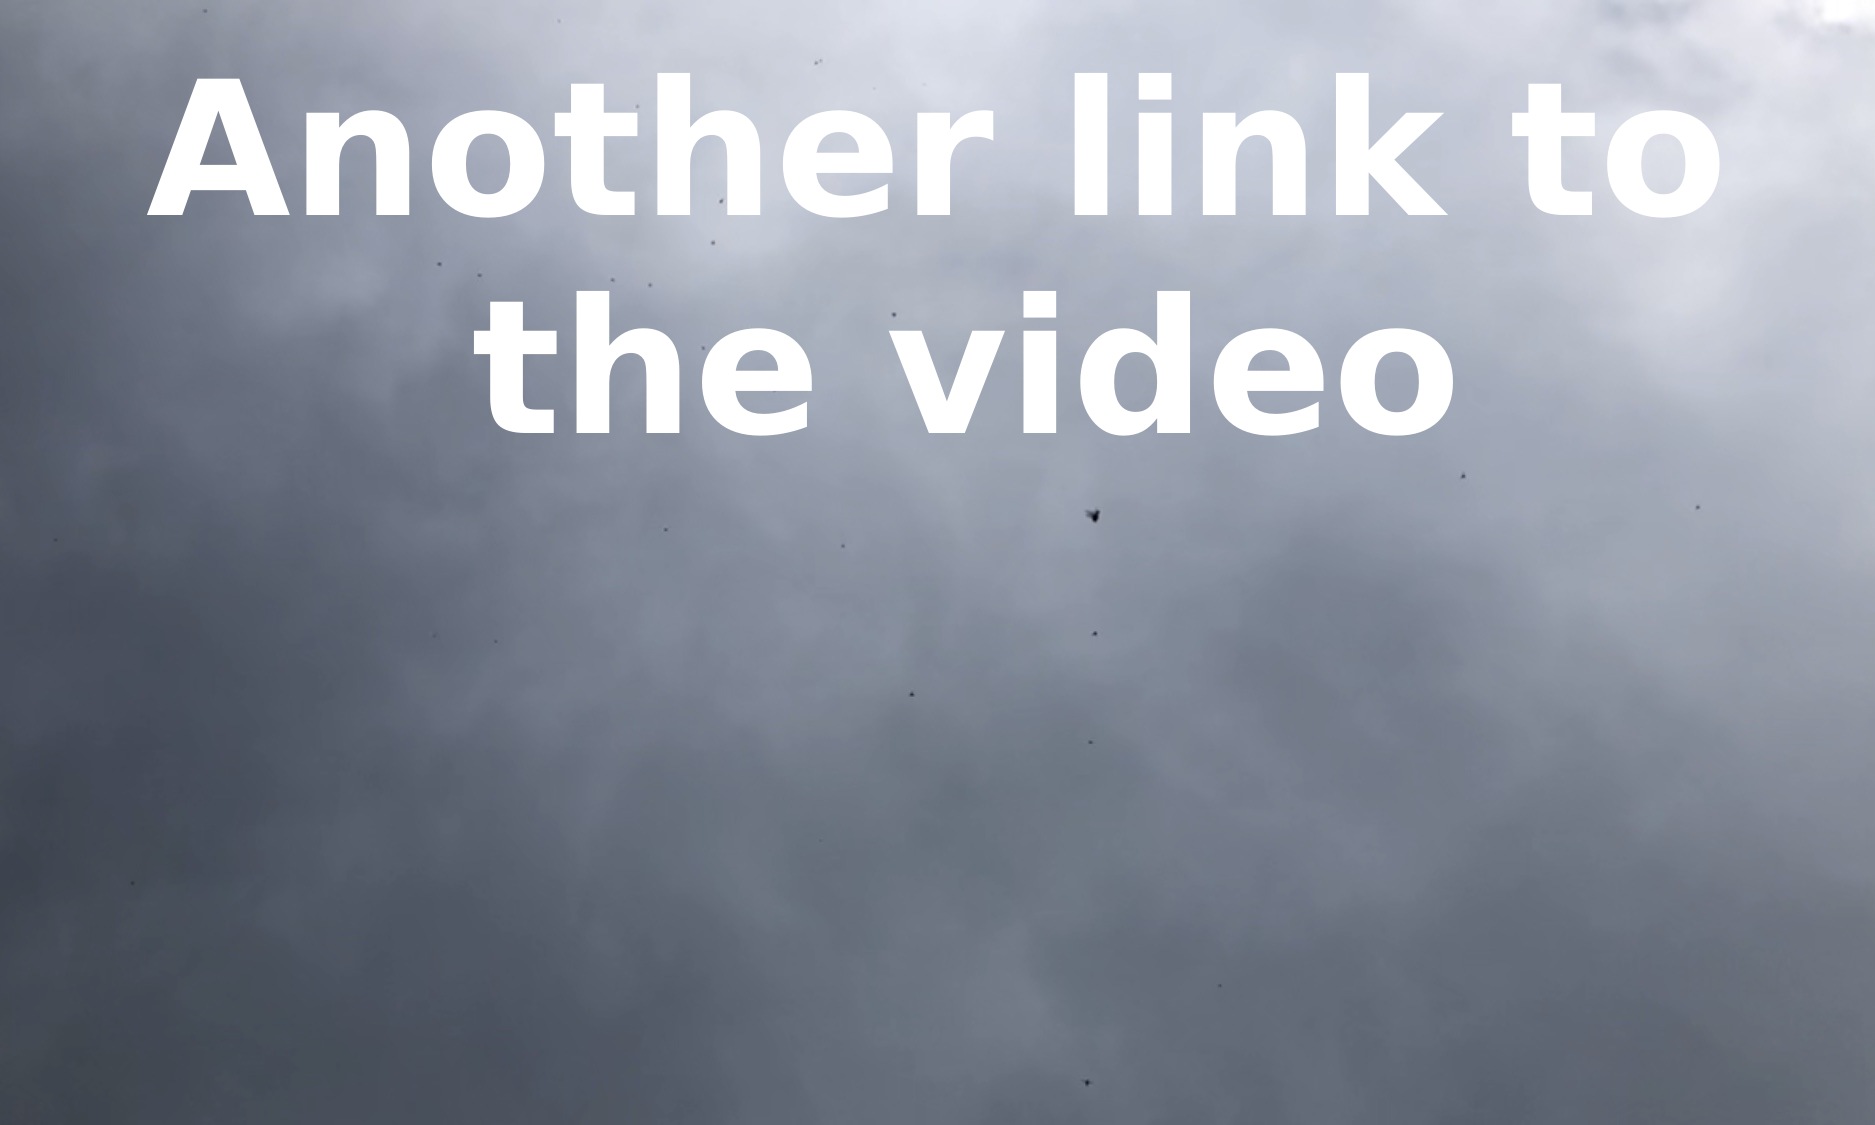 A similar pic, but with a particularly noticeable closeup fly for this pic, it was blurry but, there is text that says 'another link to the video', so this image can't be zoomed in on since it's a link, and the fly is just noticeable for the thumbnail to the video.